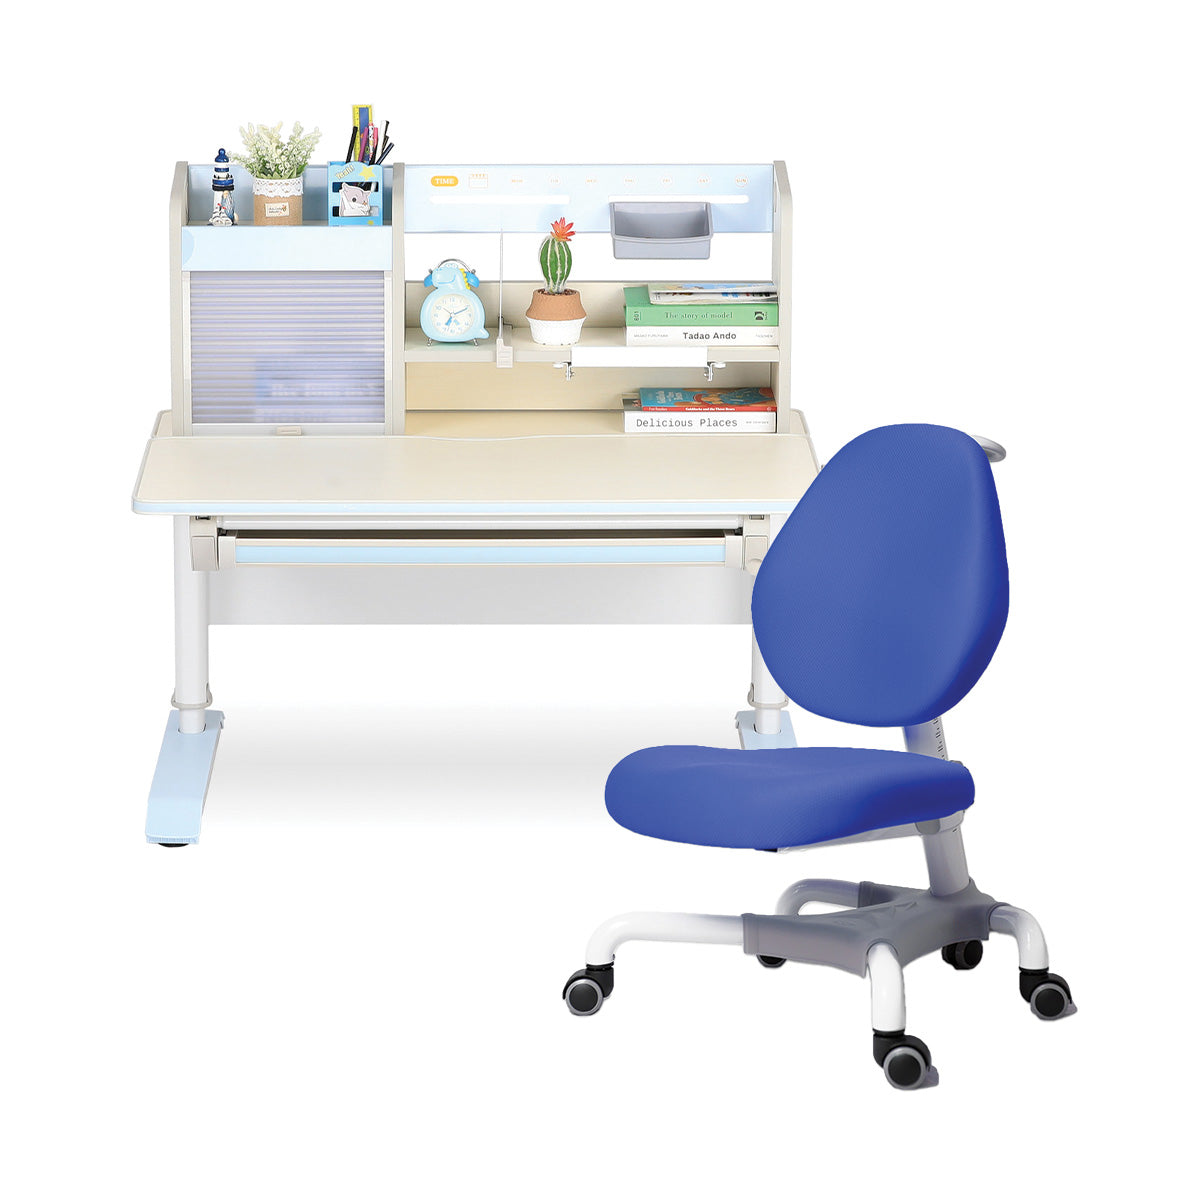 IMPACT Ergo-Growing Study Desk And Chair Set 1050mm x 700mm,  IM-D12M1050V2-BL